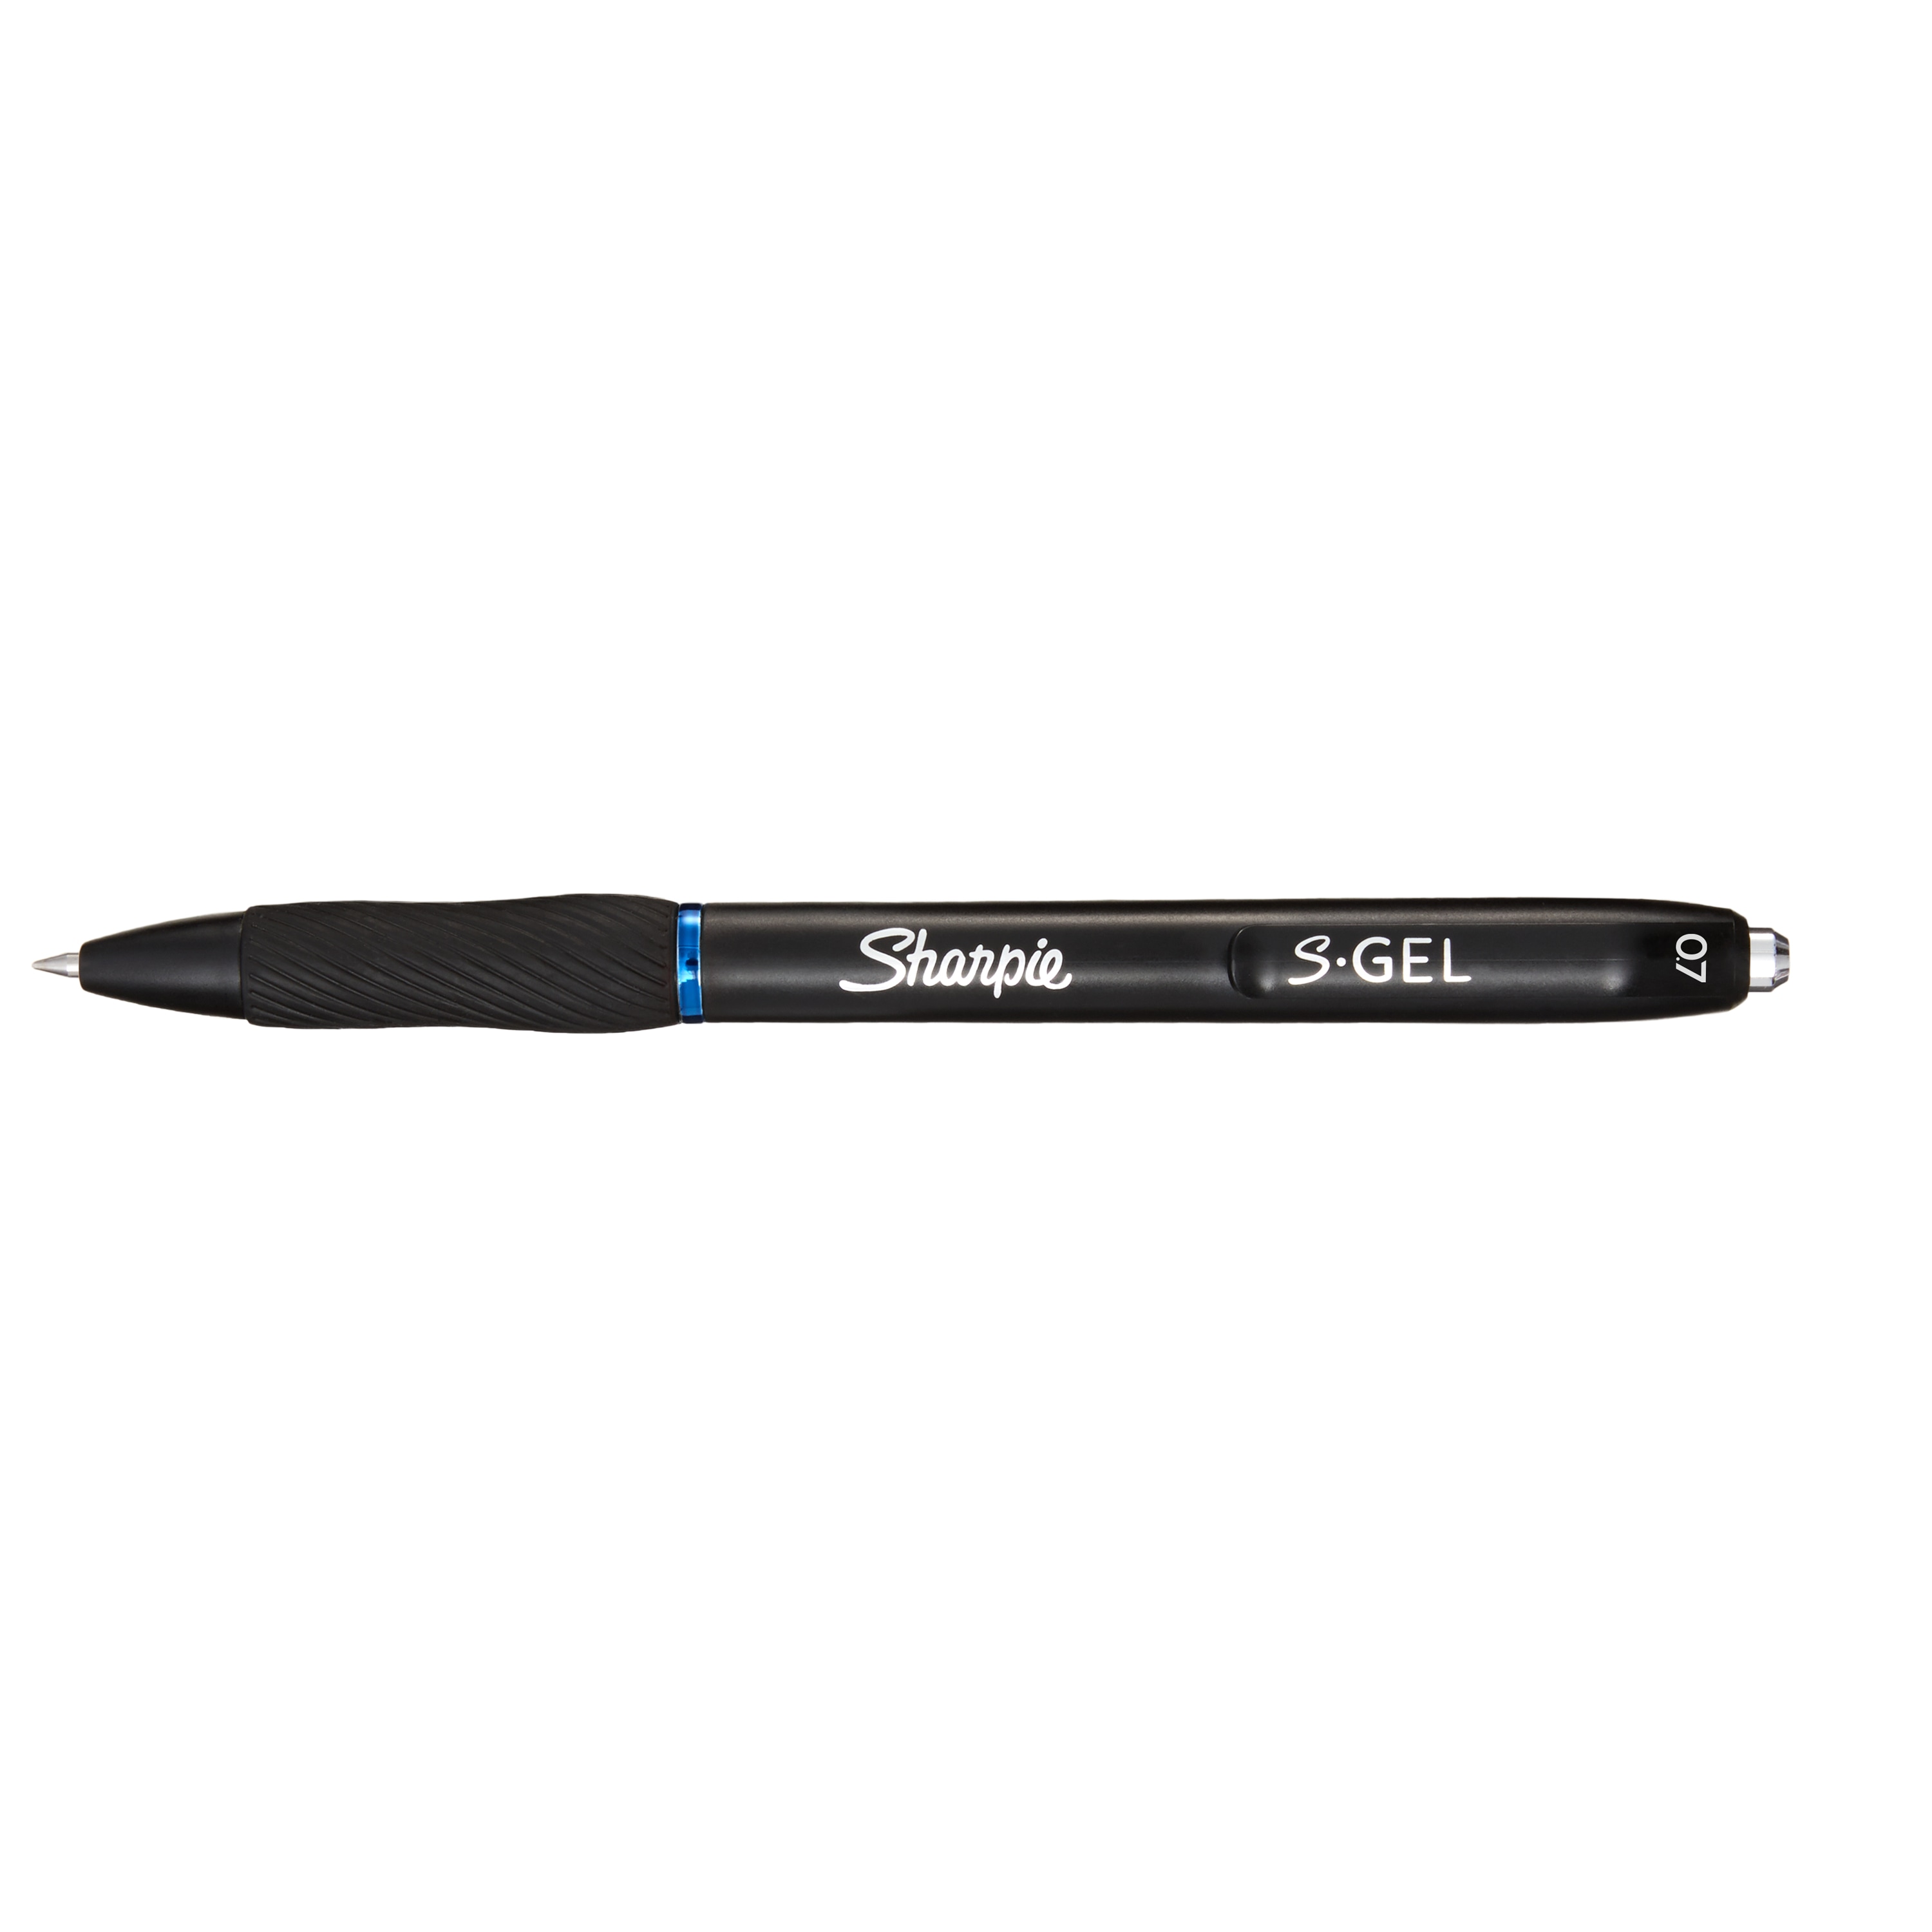 Sharpie Gel 0.7MM 2CT Blue - Medium Size Gel Pen with No Smear, No Bleed  Technology - Intensely Bold Ink - Comfortable Rubber Grip in the Writing  Utensils department at